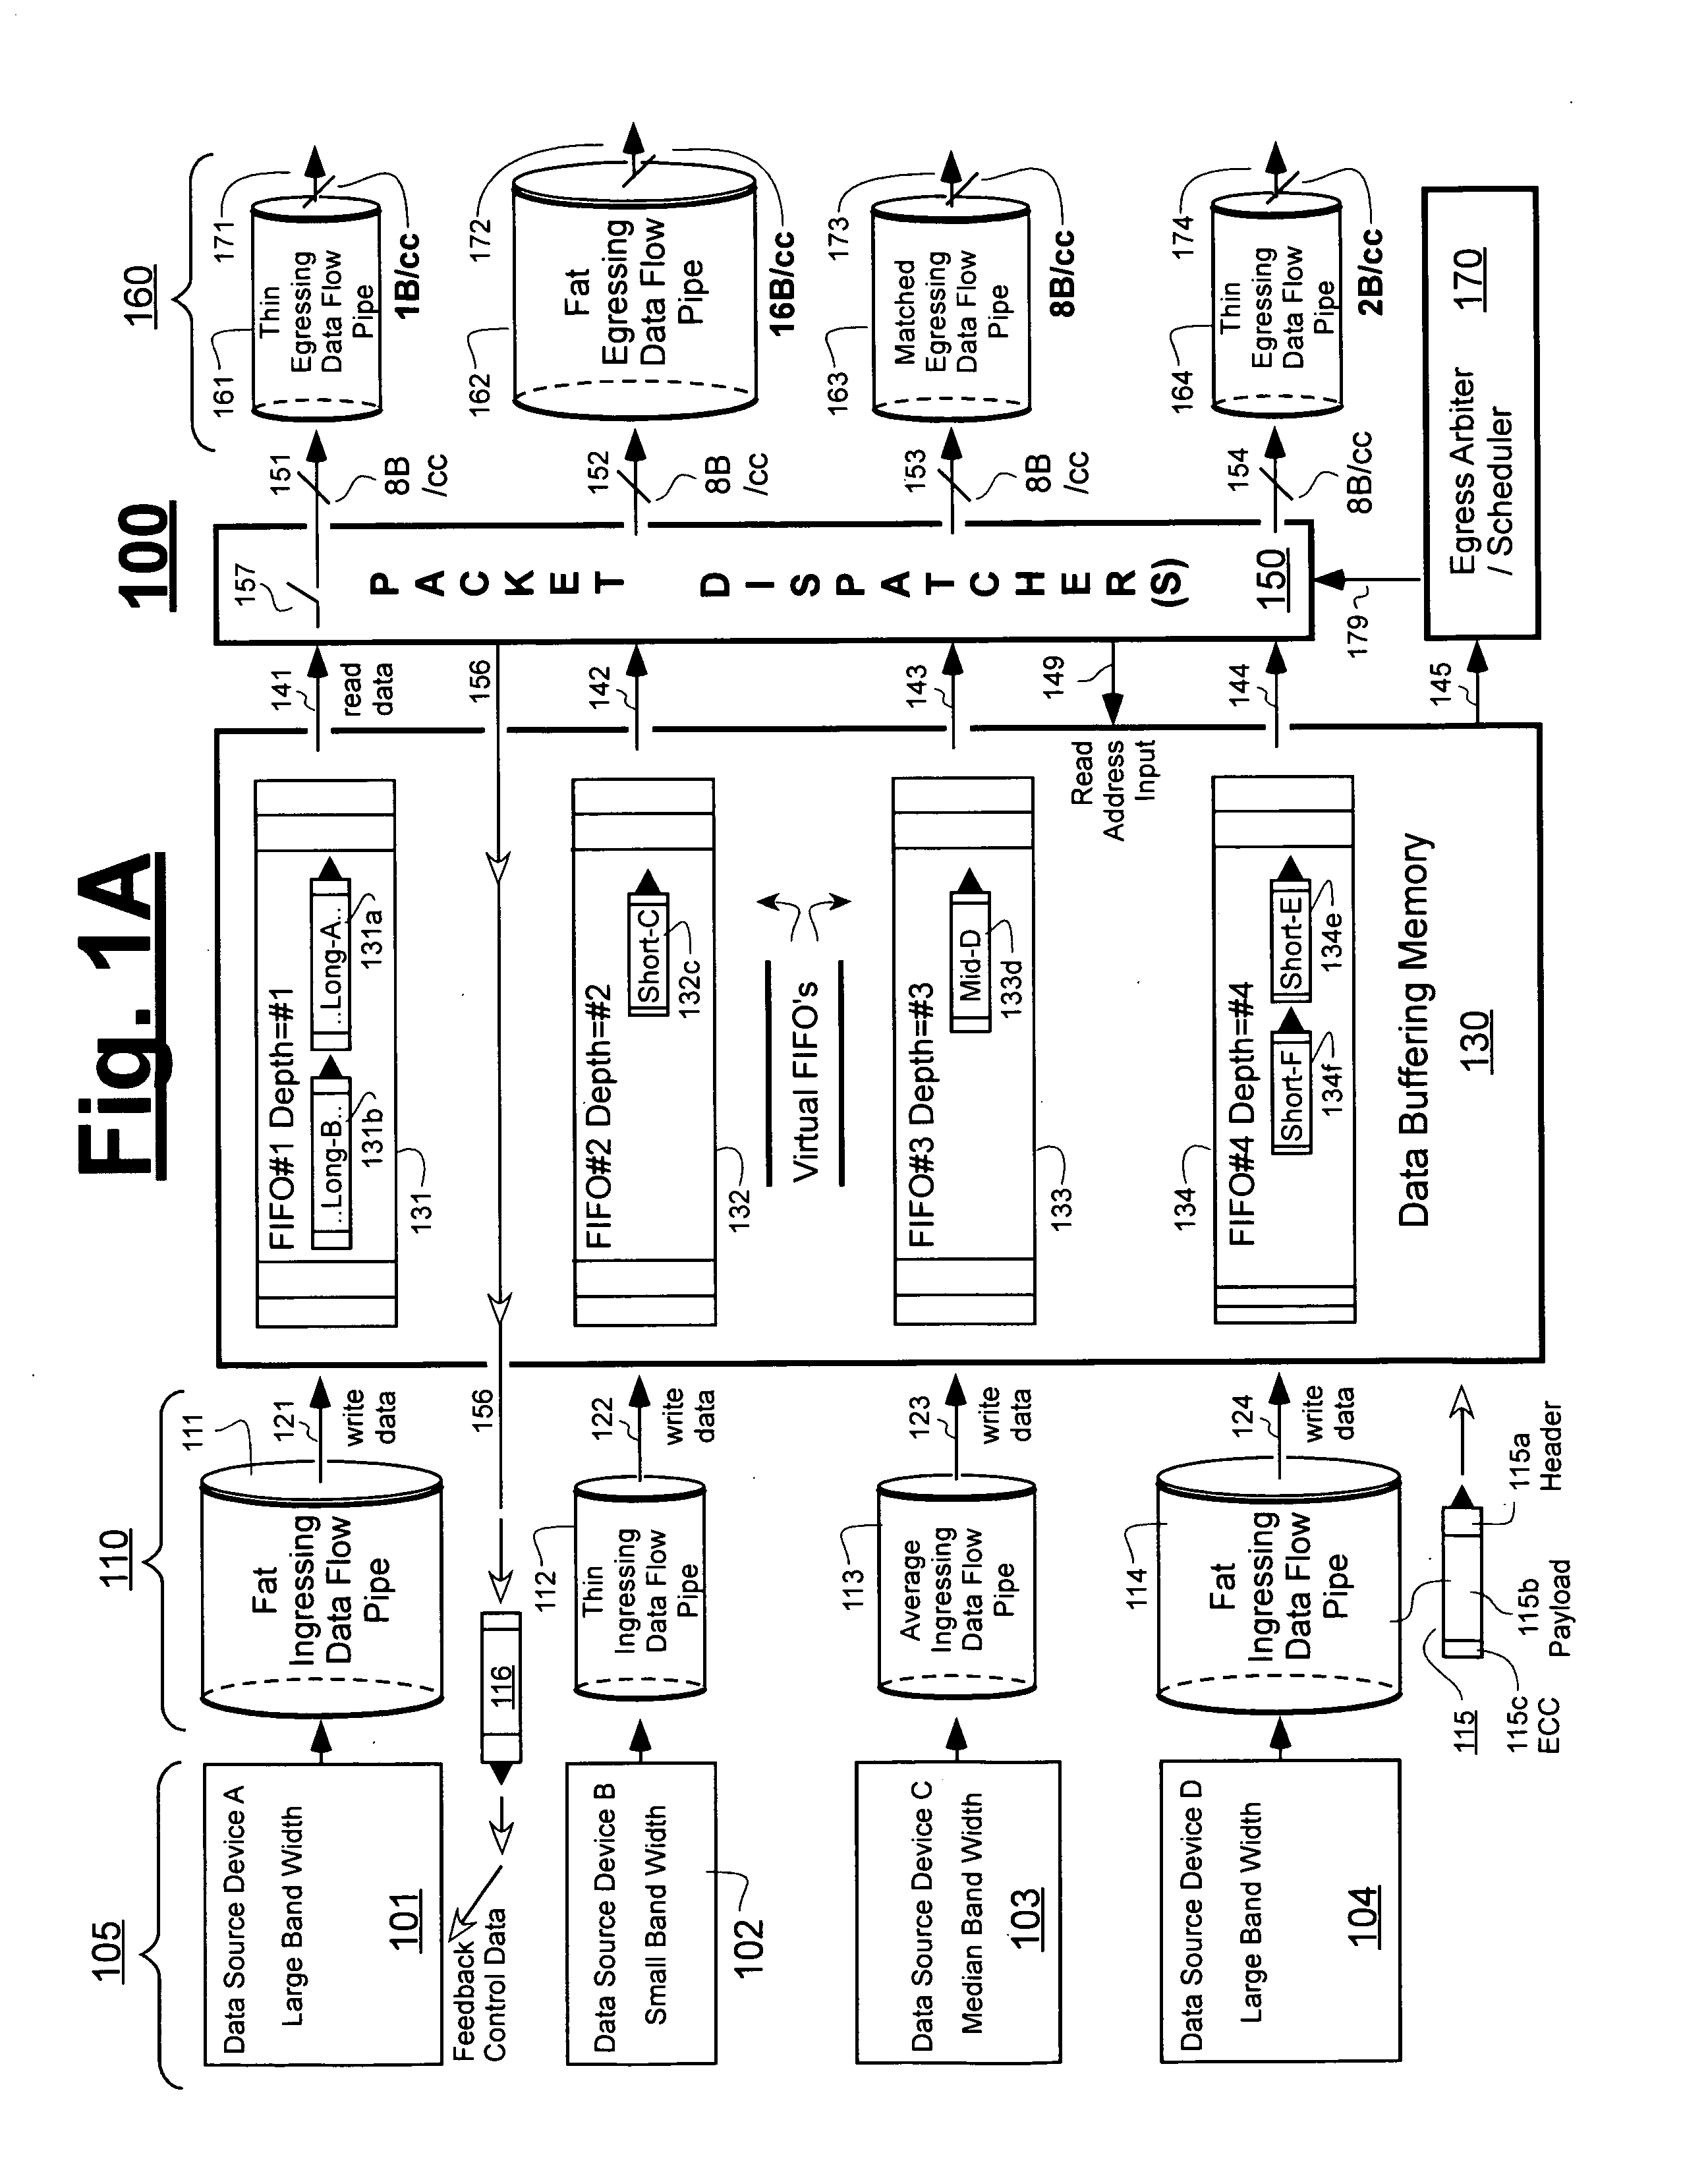 Packets transfer device that intelligently accounts for variable egress channel widths when scheduling use of dispatch bus by egressing packet streams